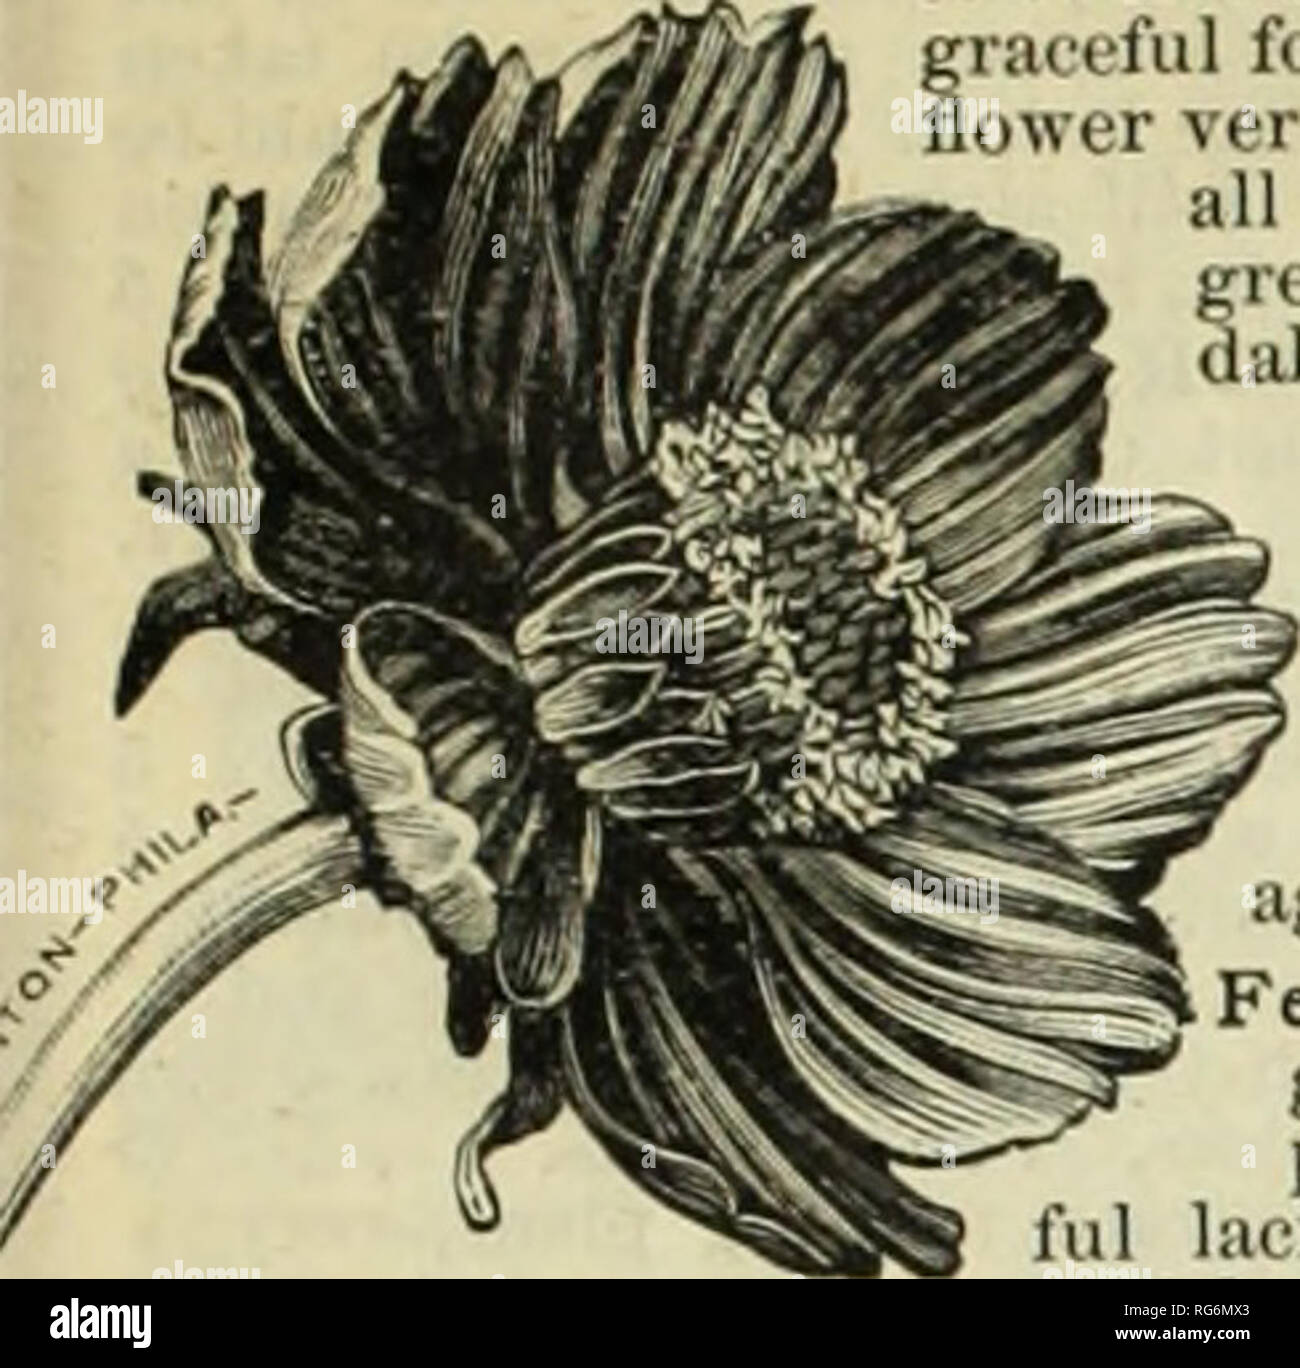 . Burpee's farm annual. Nursery stock Pennsylvania Philadelphia Catalogs; Flowers Pennsylvania Catalogs; Vegetables Pennsylvania Catalogs; Seeds Pennsylvania Catalogs. BURPEE'S ANNUAL FDOWER SEEDS. &quot;5. TER PKT. BIDENS. Atrosanguinea (Dahlia Zimapani or Tlie Miniature Black Dahlia). Plants grow only nine to t welve inches high, with neat, giai eful foliage. They begin to iiower very early, and continue all summer to produce a great profusion of single, dahlia-like flowers. These &quot;Min iatitre Dahlias &quot; are of the deepest, velvety, dark, blood- red^ appearing nearly black, and are  Stock Photo